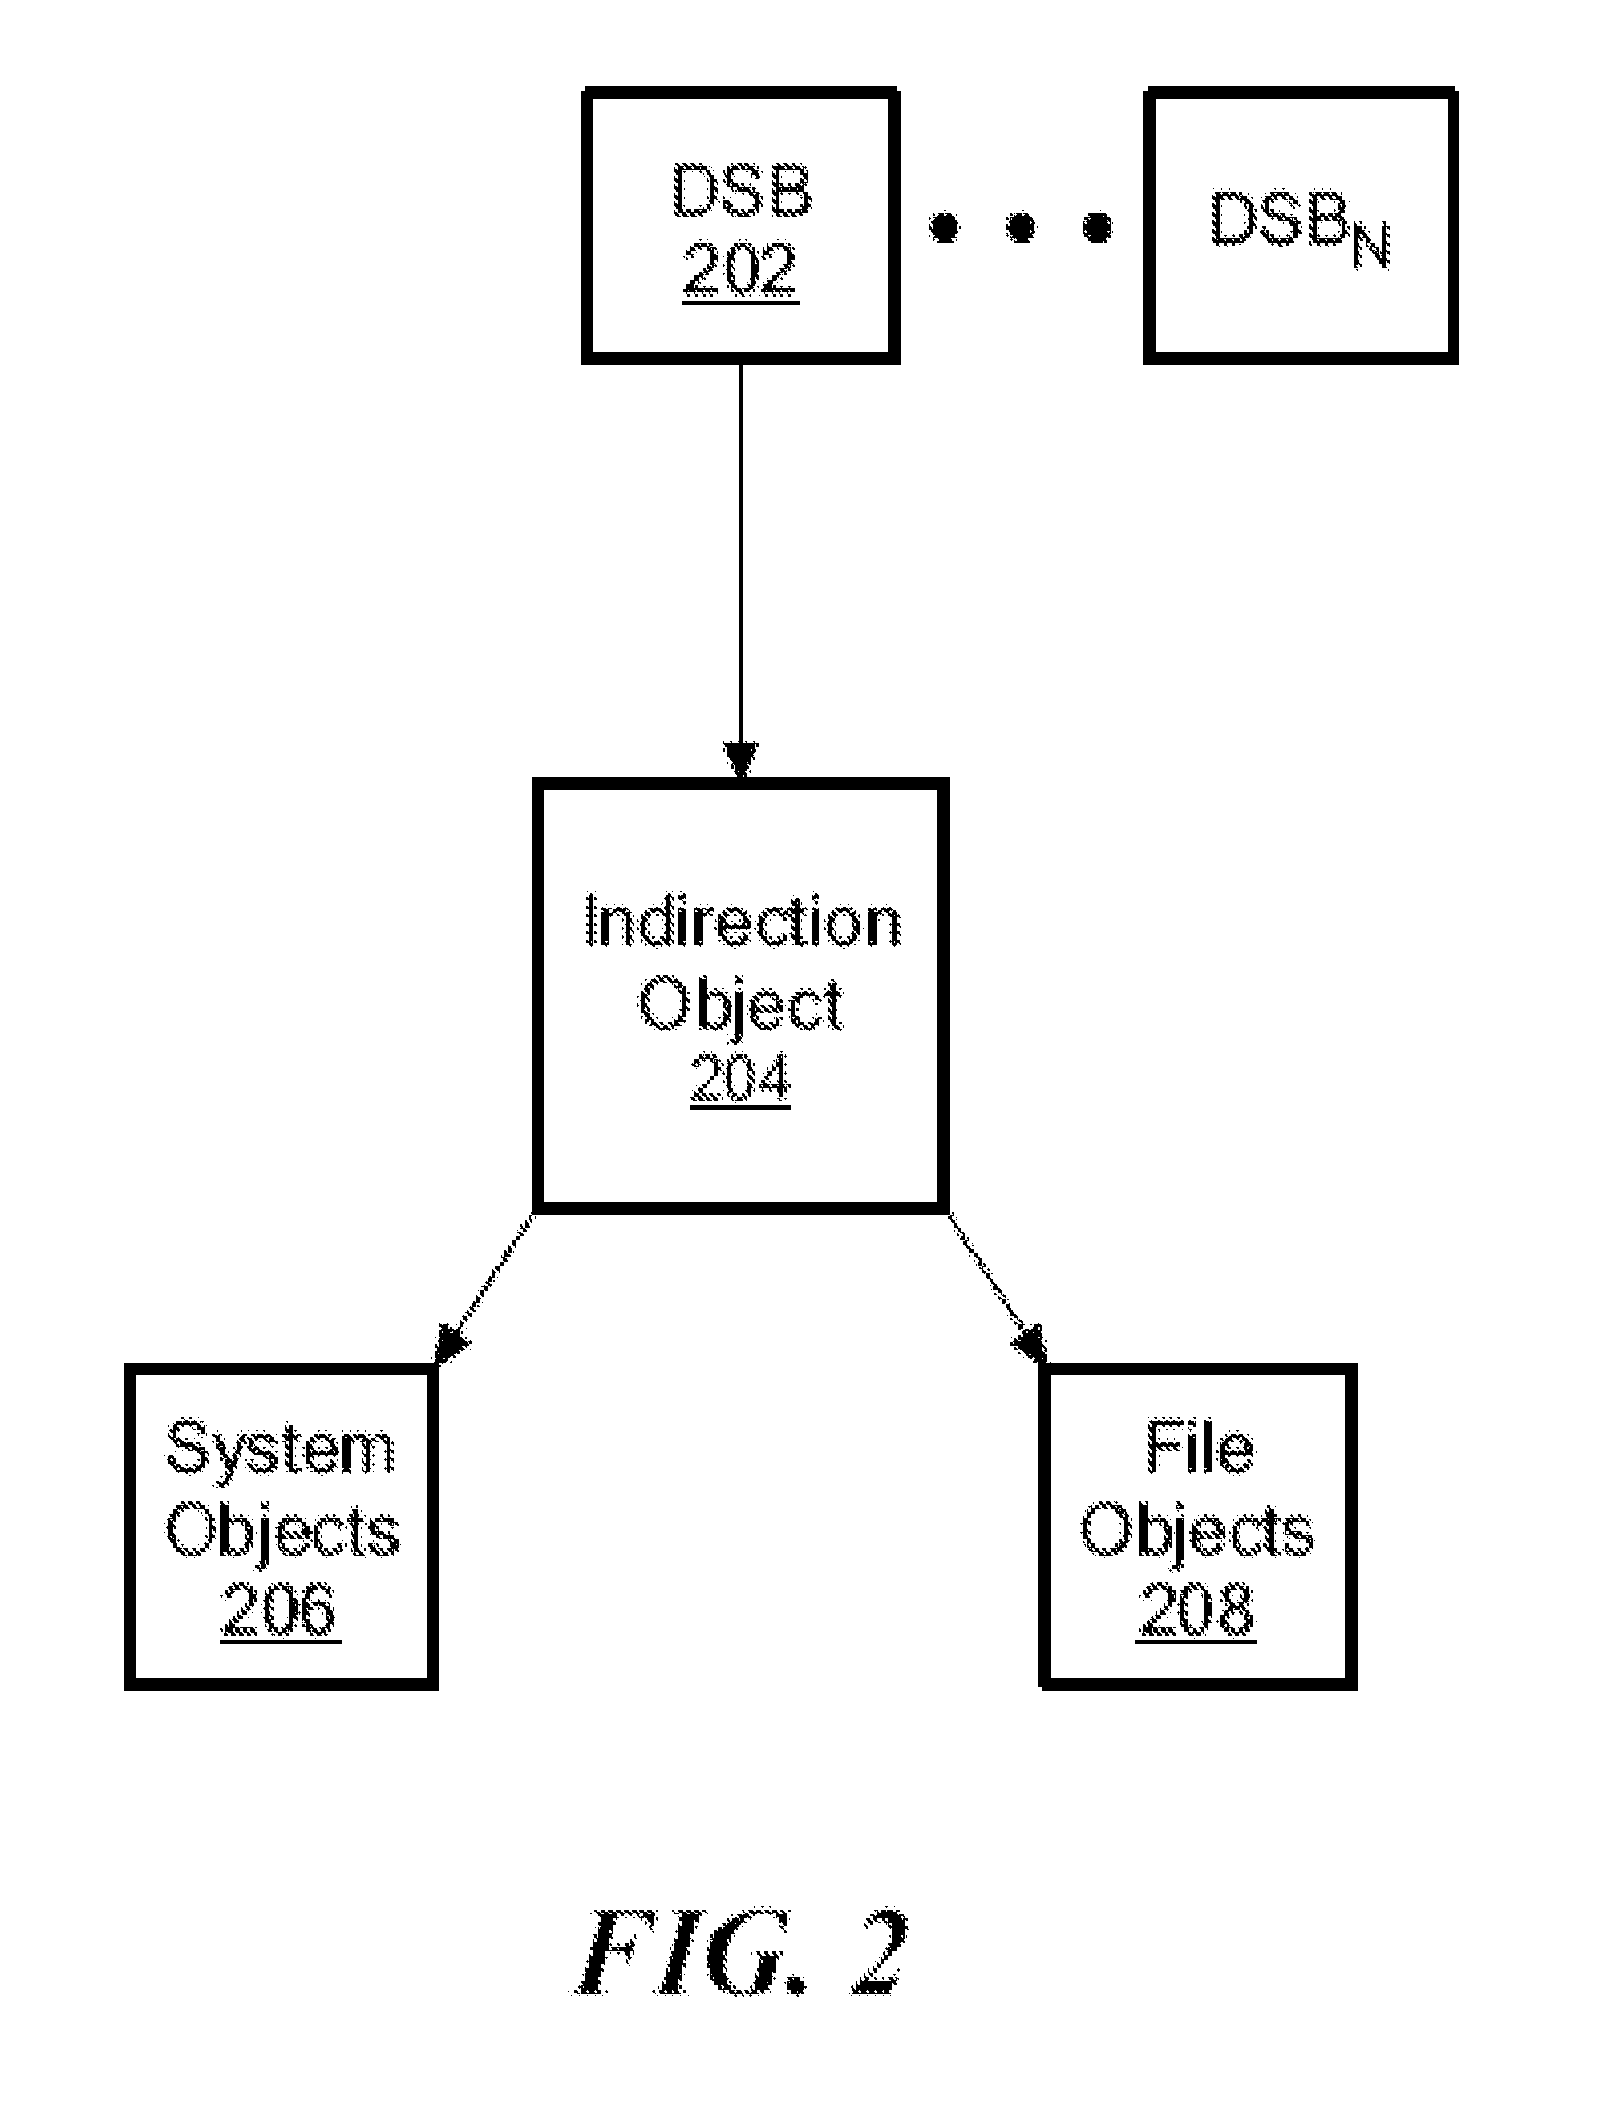 Object-Level Replication of Cloned Objects in a Data Storage System